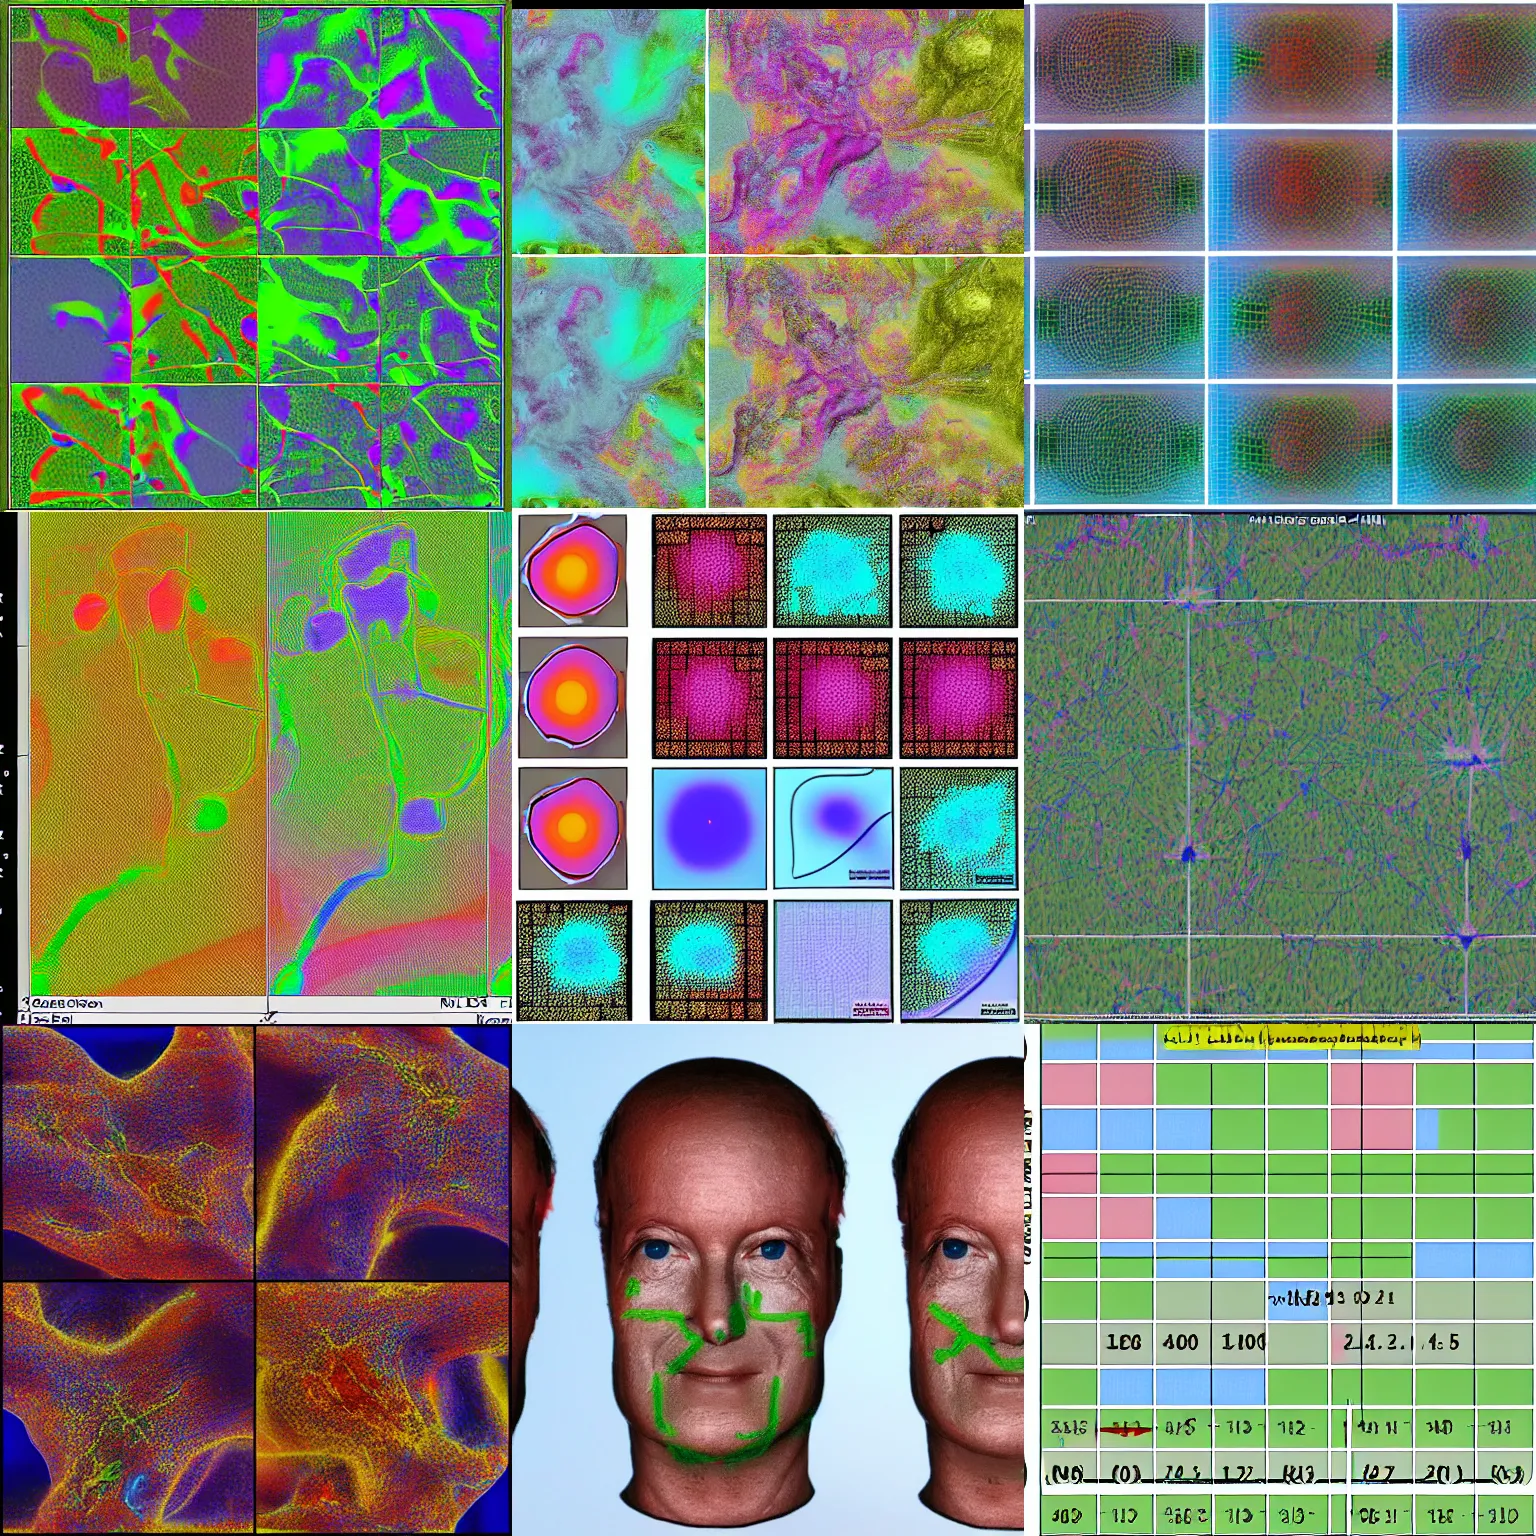 Prompt: Dall-E 2, CrAIyon results, AI generated images, Stable Diffusion